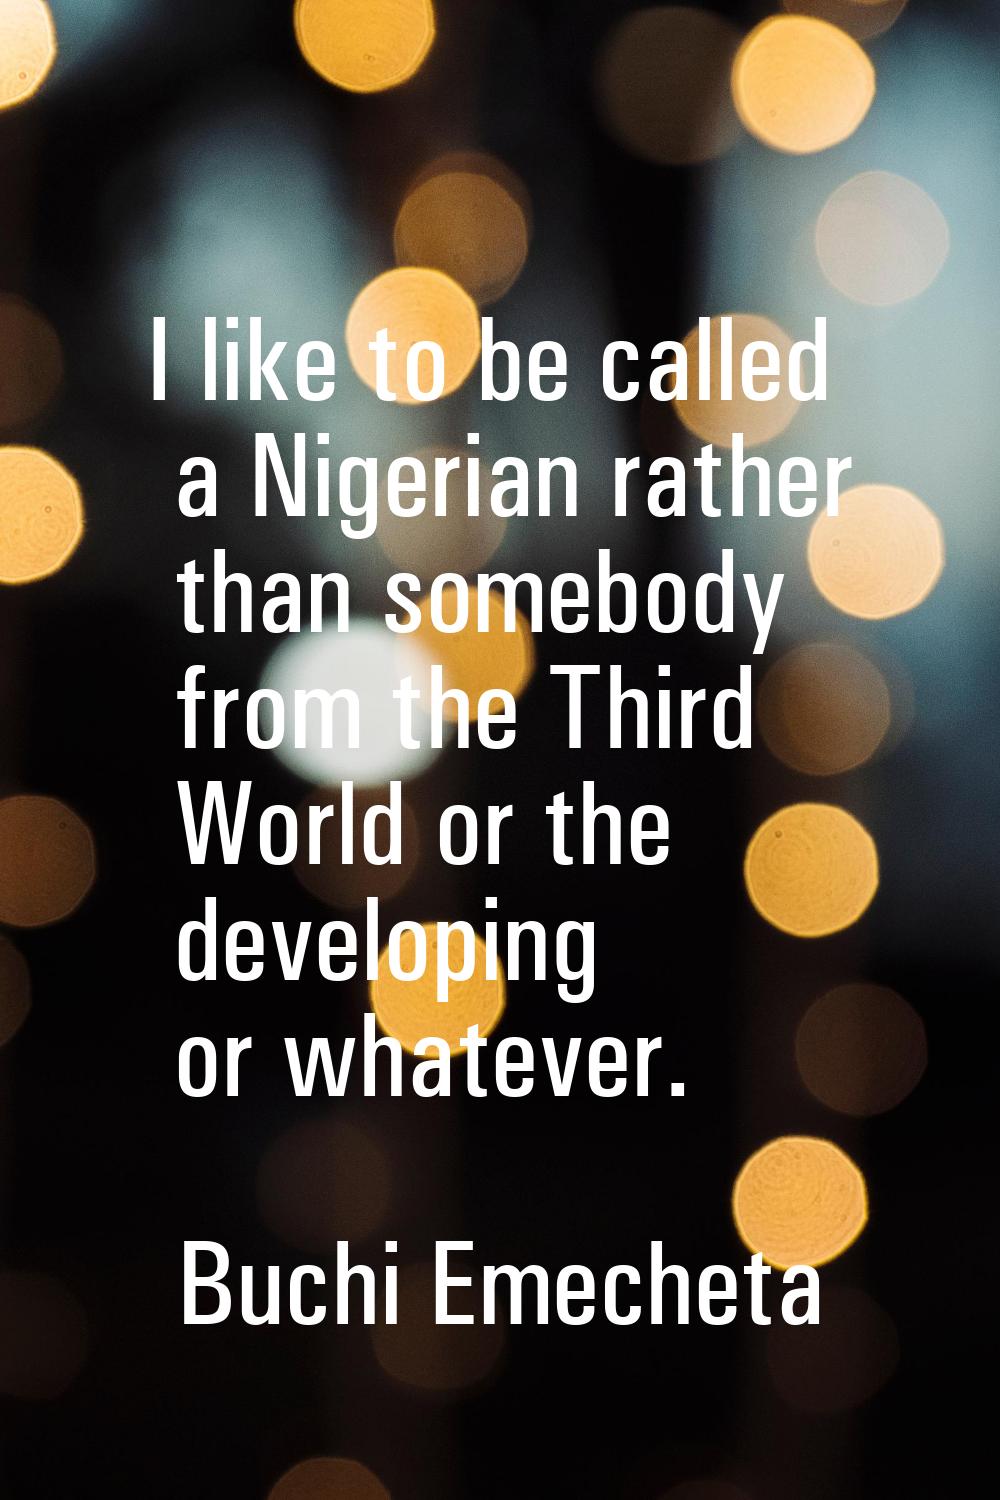 I like to be called a Nigerian rather than somebody from the Third World or the developing or whate